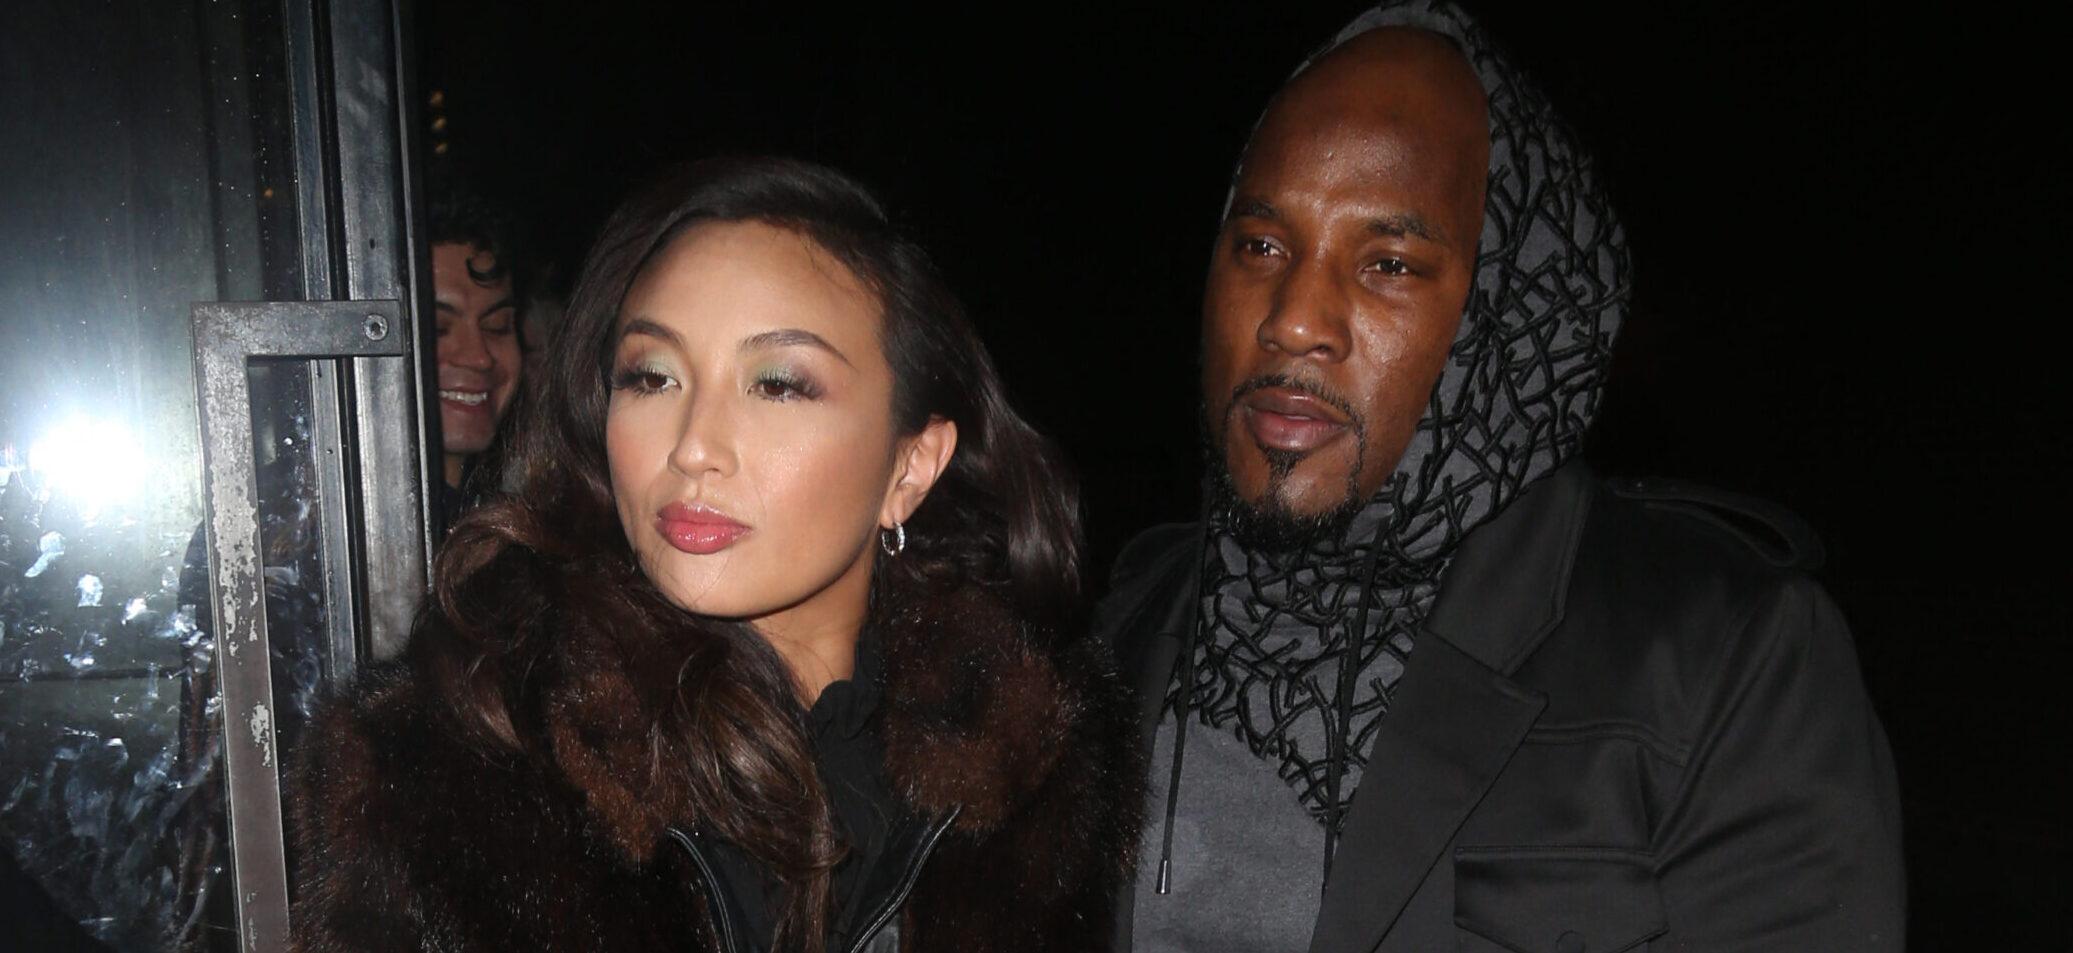 Jeezy Claims Jeannie Mai Wants To ‘Destroy’ His ‘Name’ And ‘Reputation’ Amid Nasty Divorce